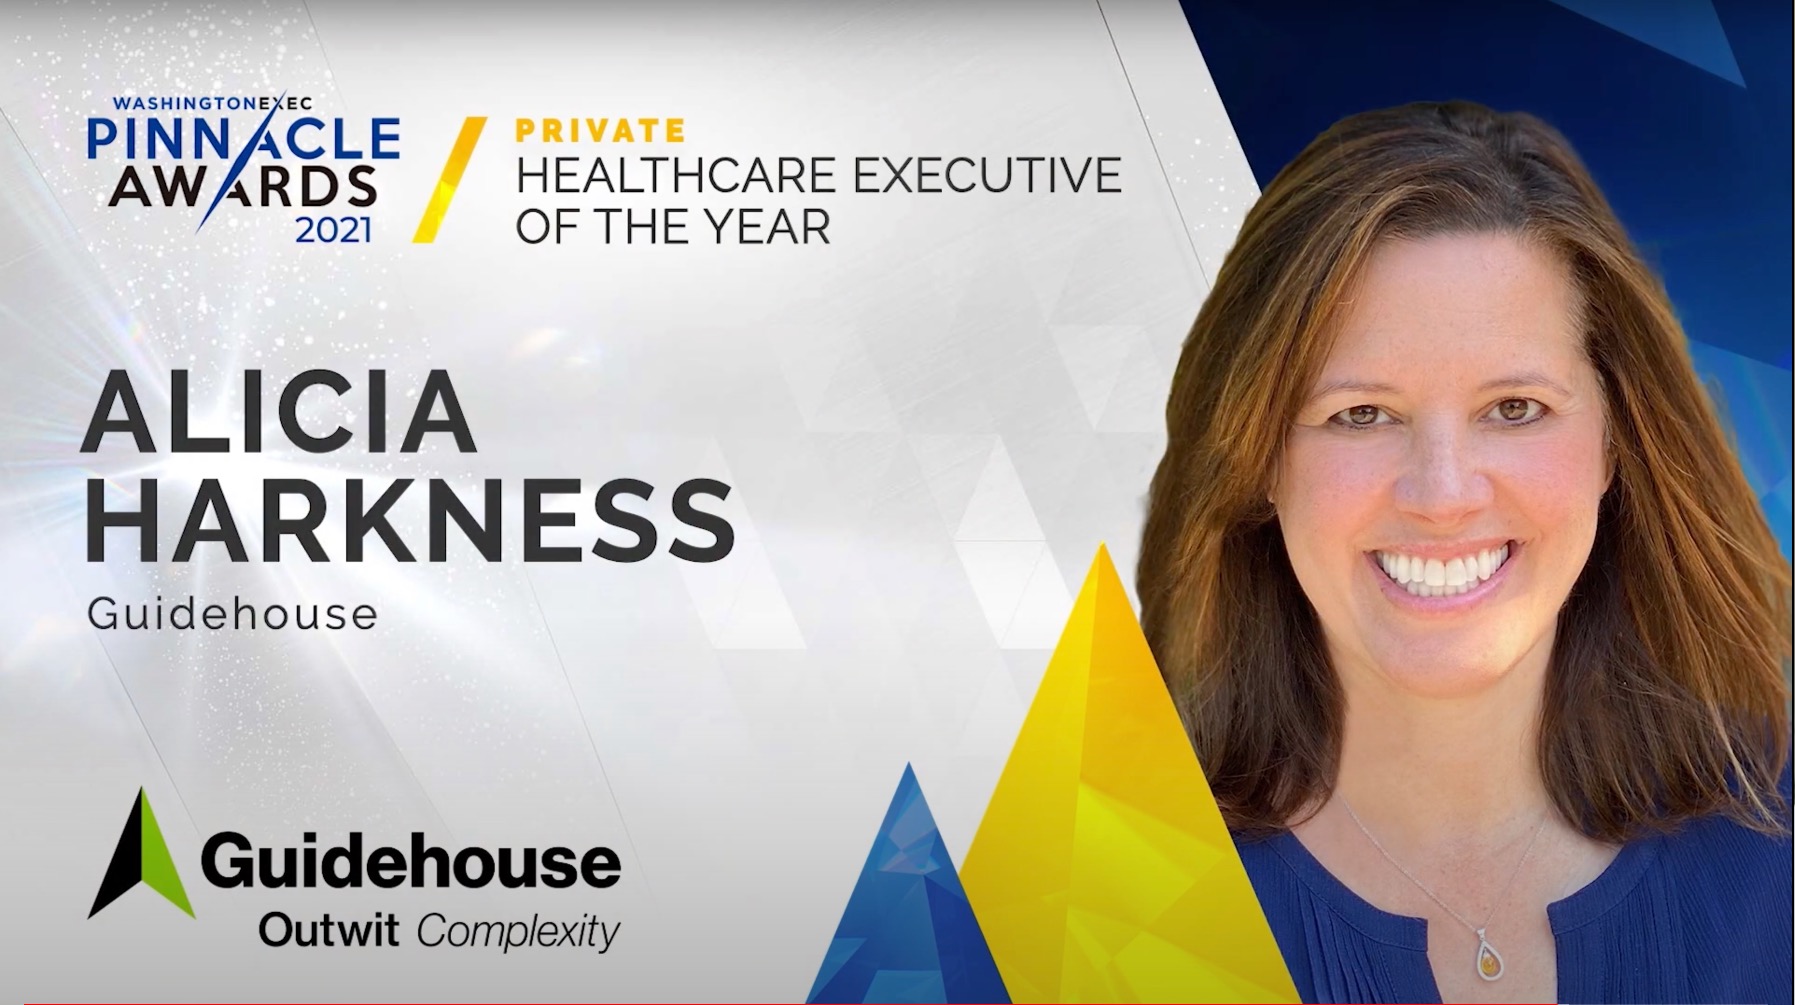 Healthcare - Congratulations to Alicia Harkness from Guidehouse on winning the award for Healthcare Executive of the Year in the Private Sector